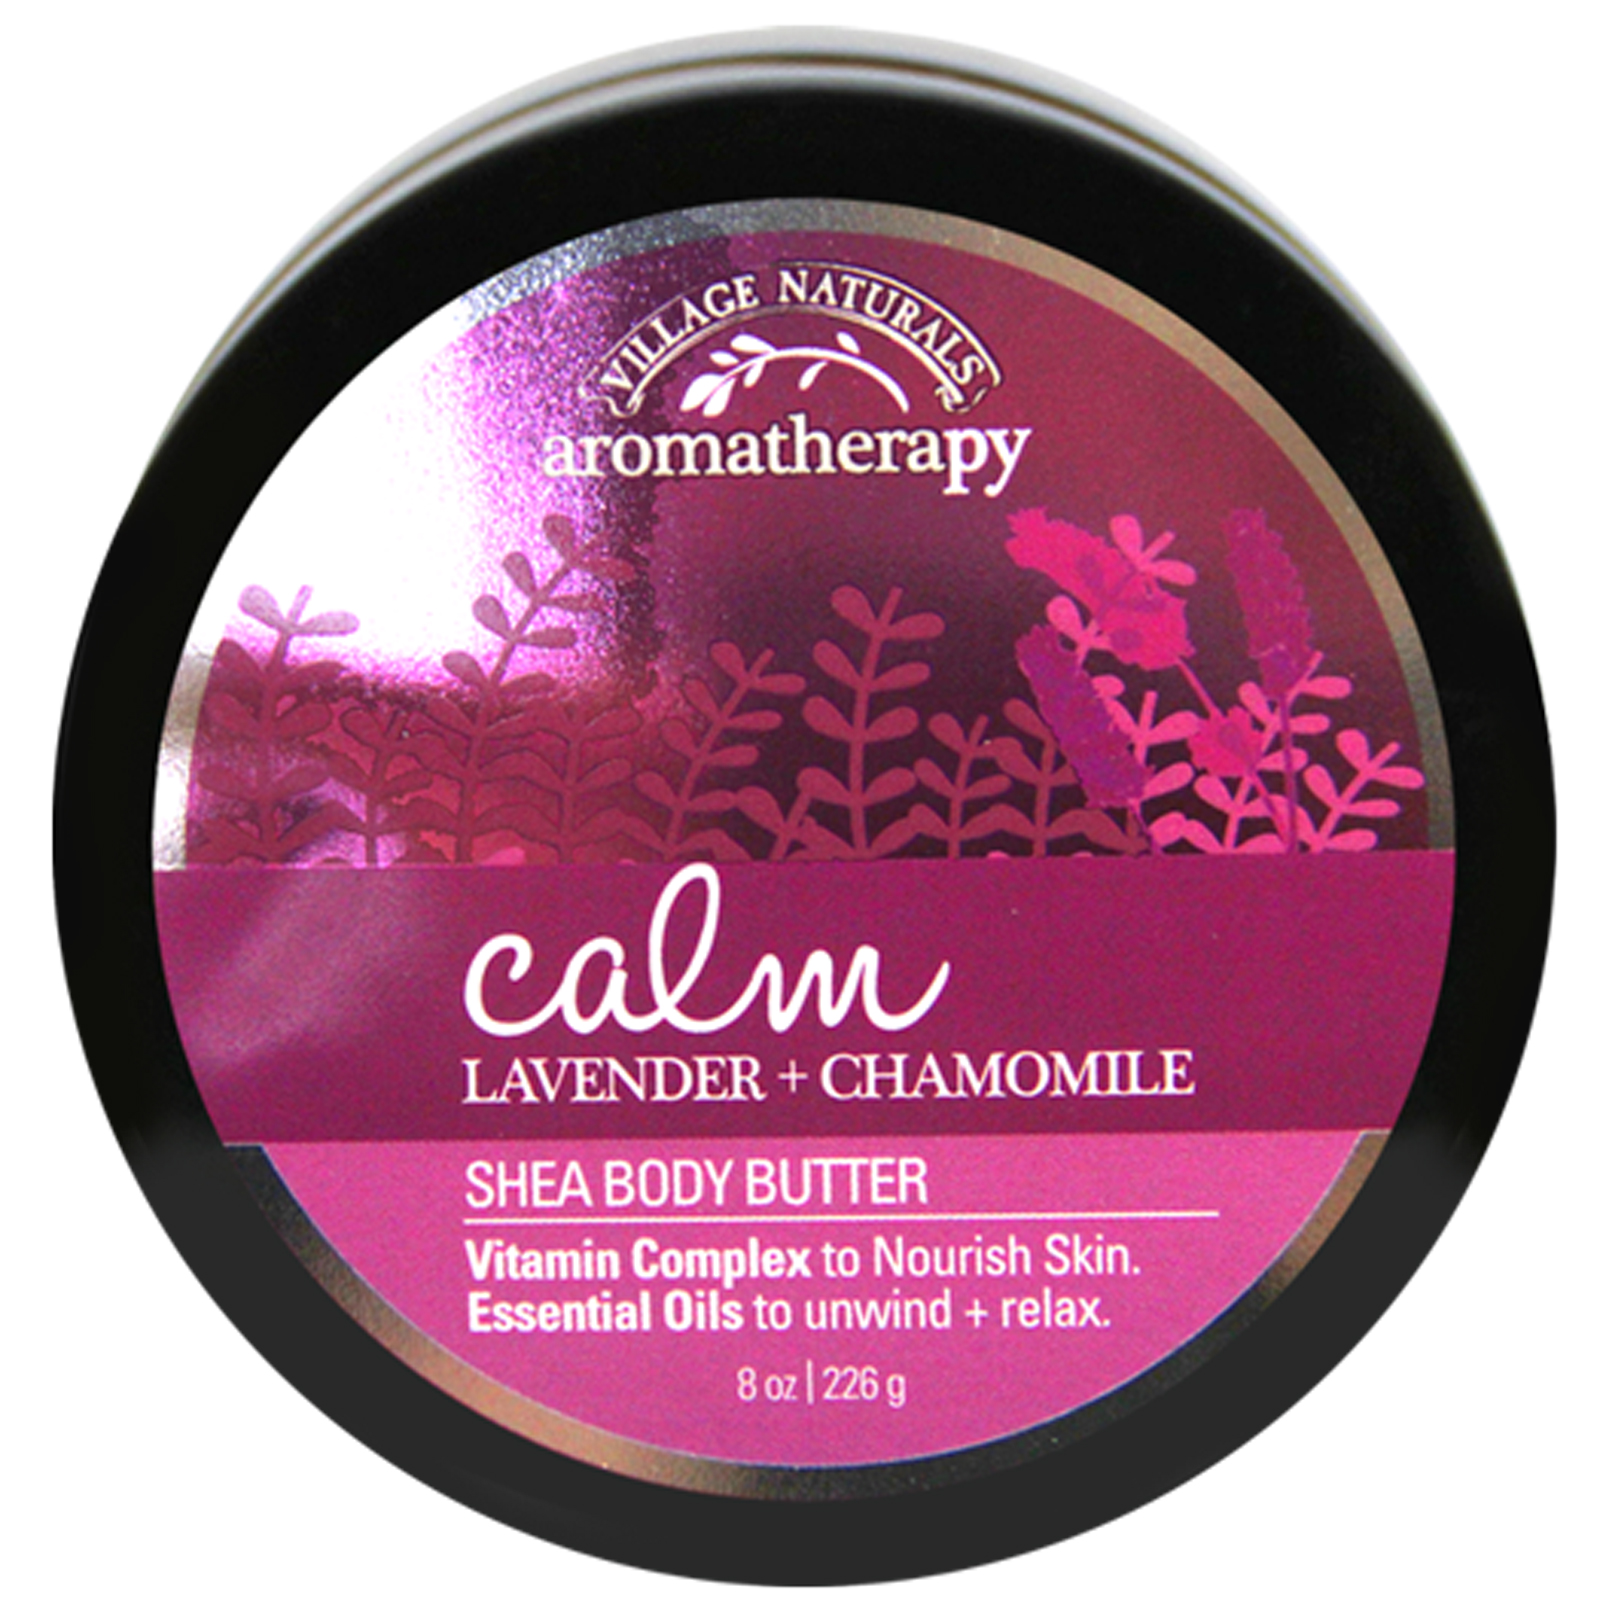 Village Naturals Aromatherapy Calm Lavender and Chamomile Body Butter, 8 oz.